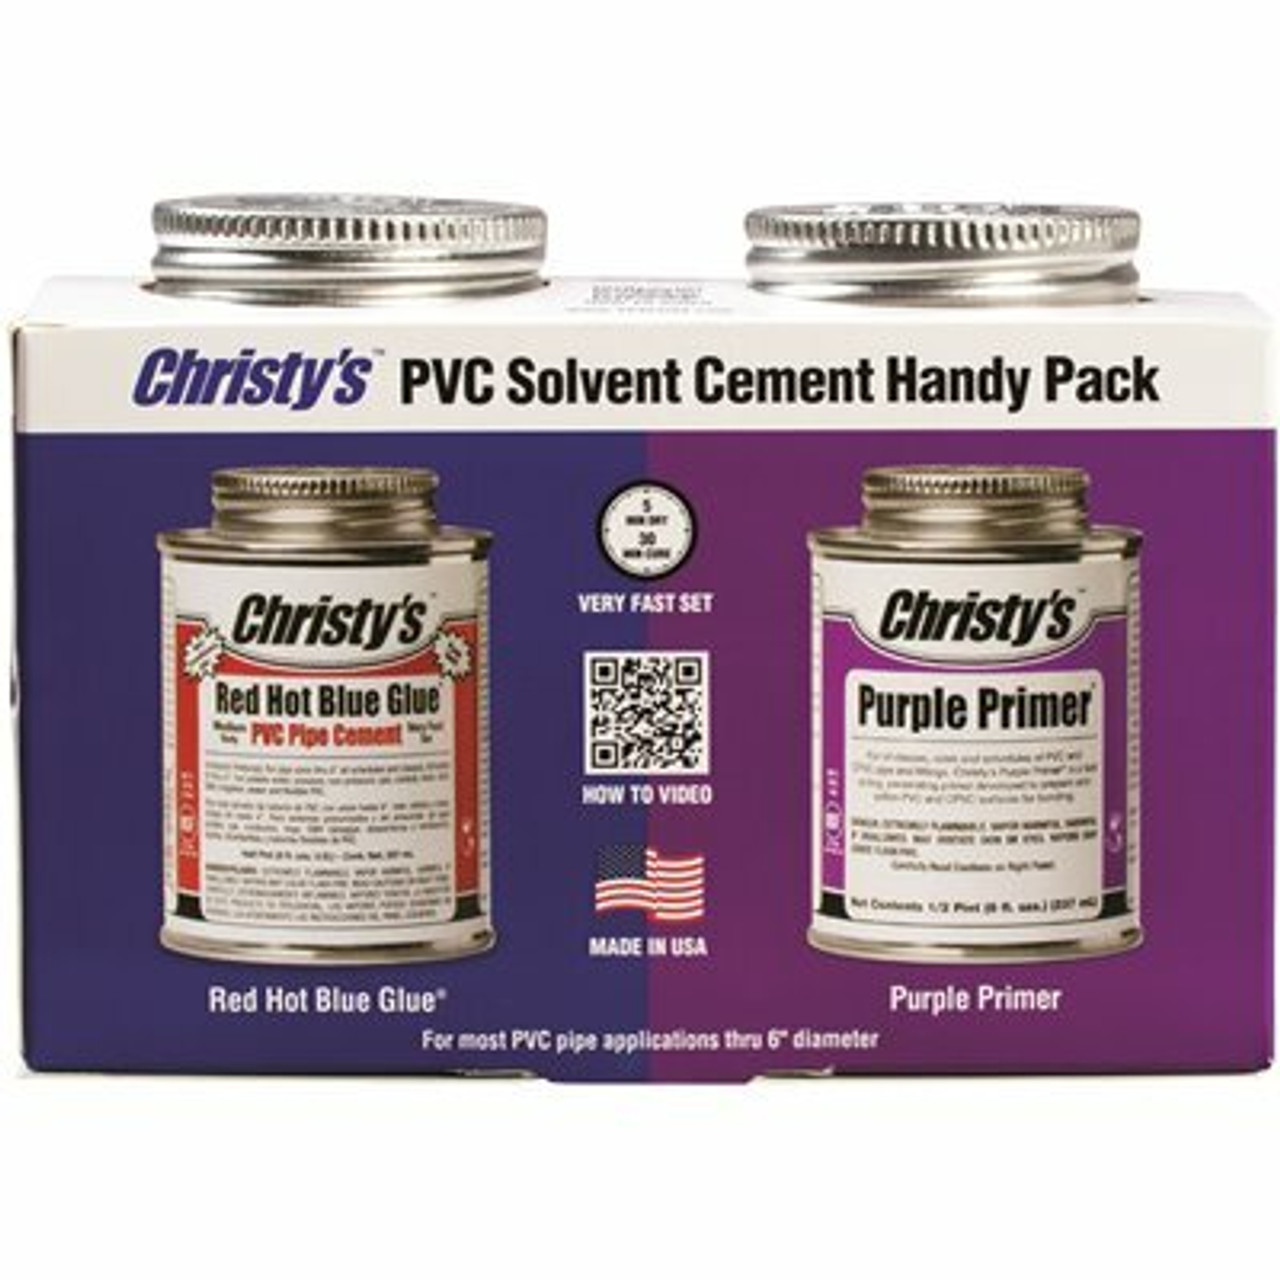 Christy'S 8 Oz. Pvc Red Hot Blue Glue And Purple Primer Handy Pack